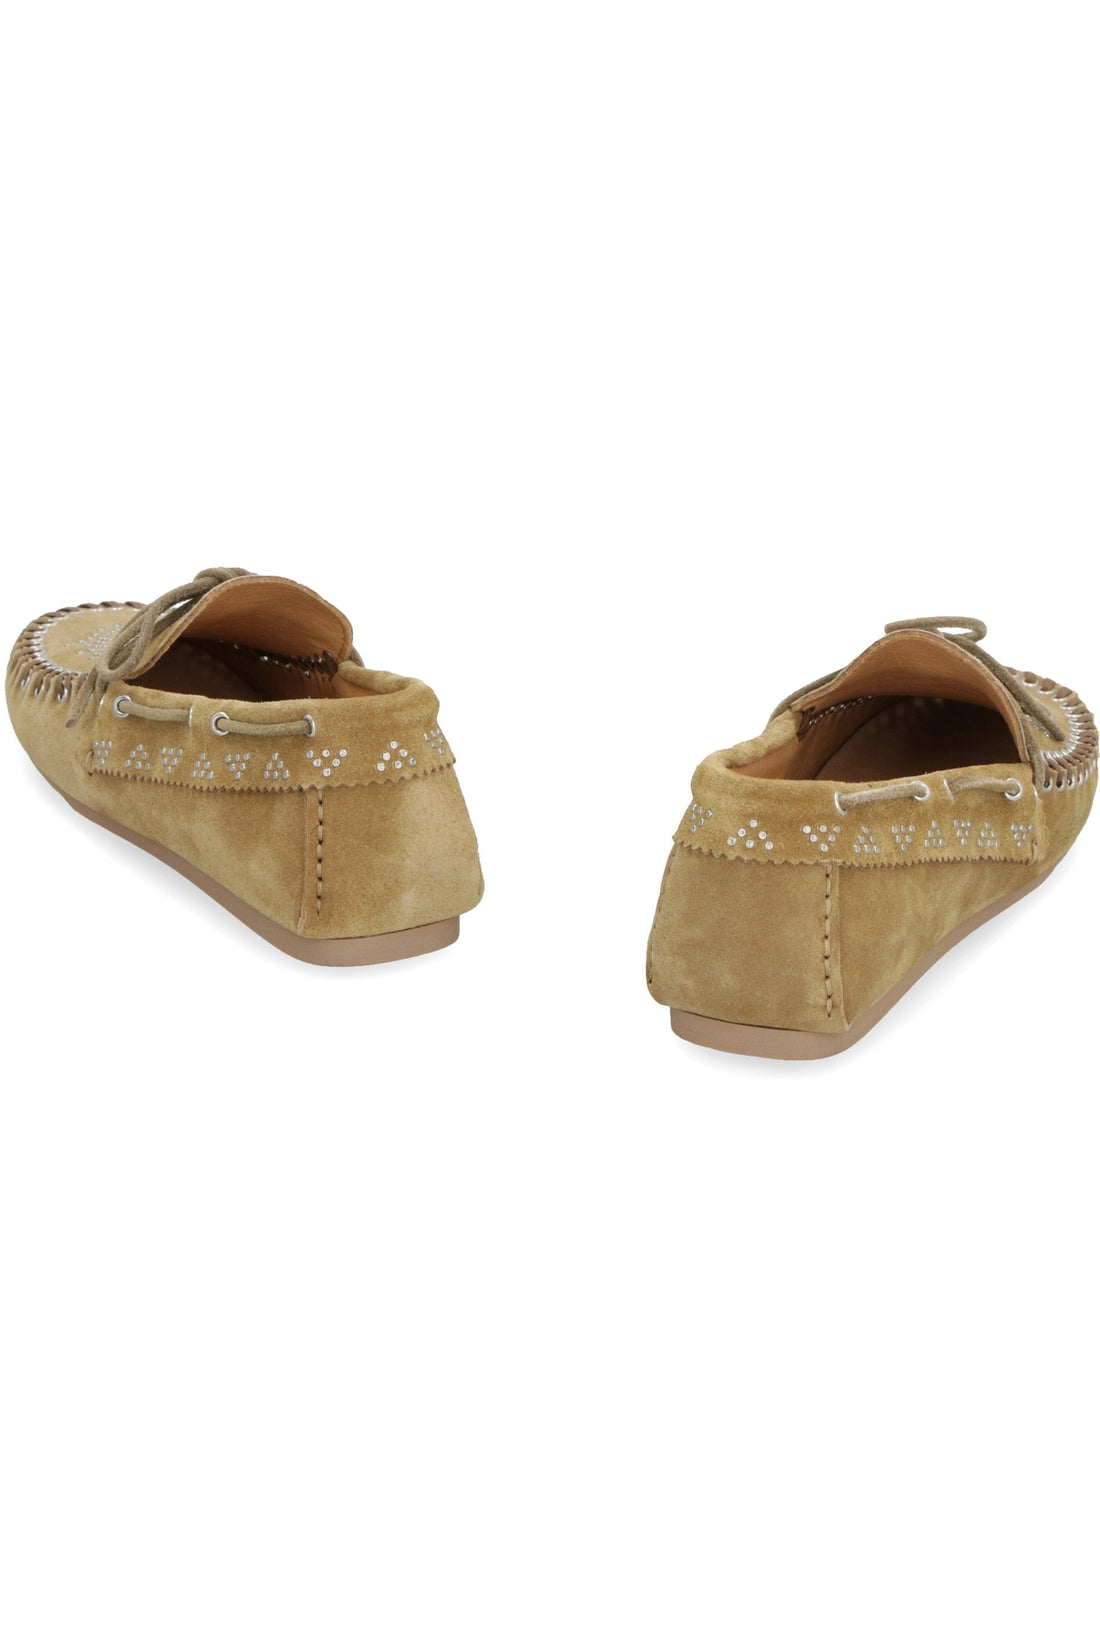 Isabel Marant-OUTLET-SALE-Freen studded suede loafers-ARCHIVIST